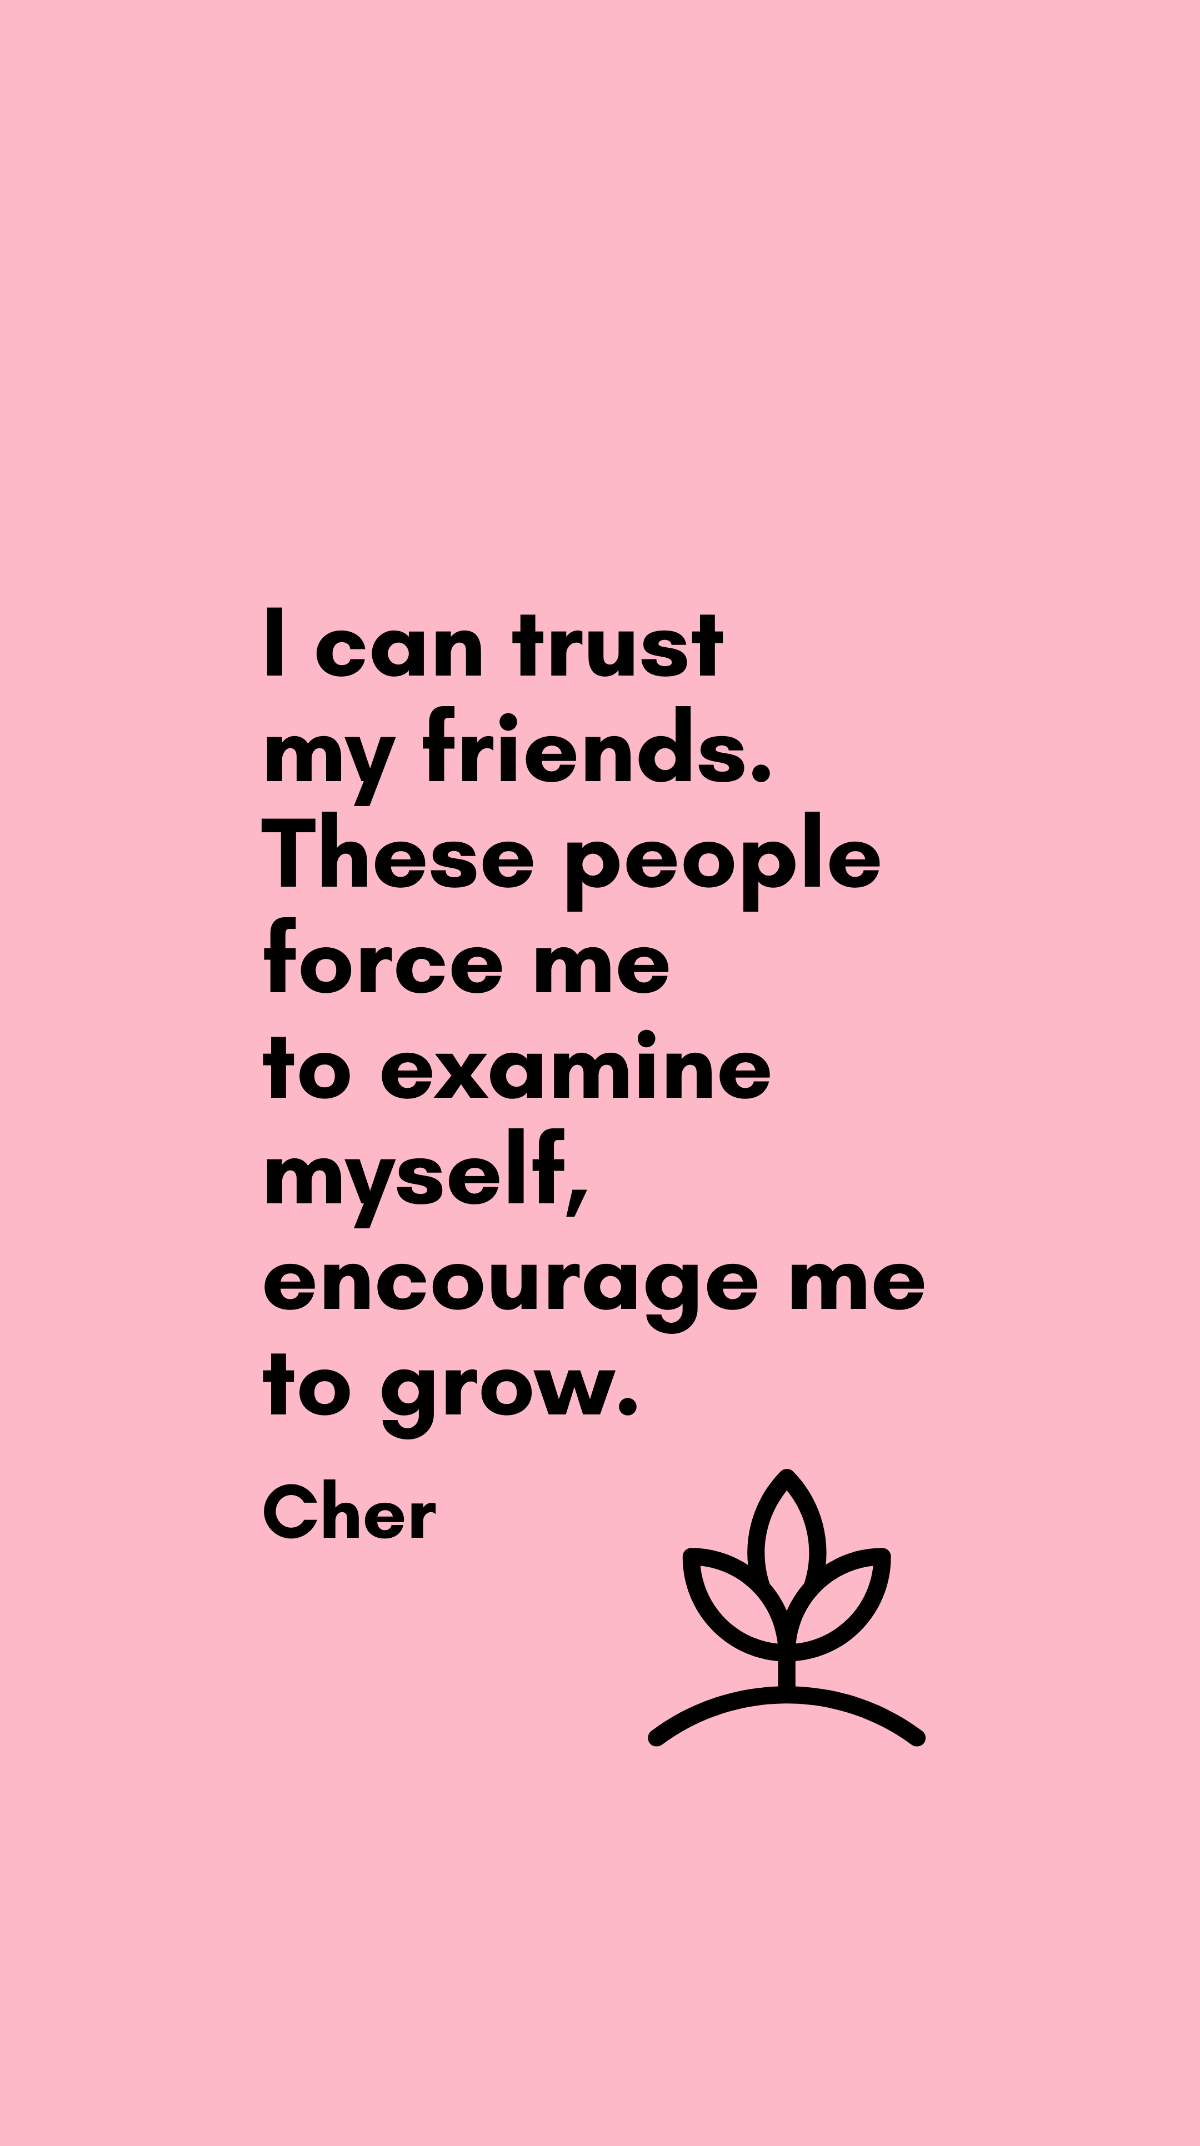 Cher - I can trust my friends. These people force me to examine myself, encourage me to grow.